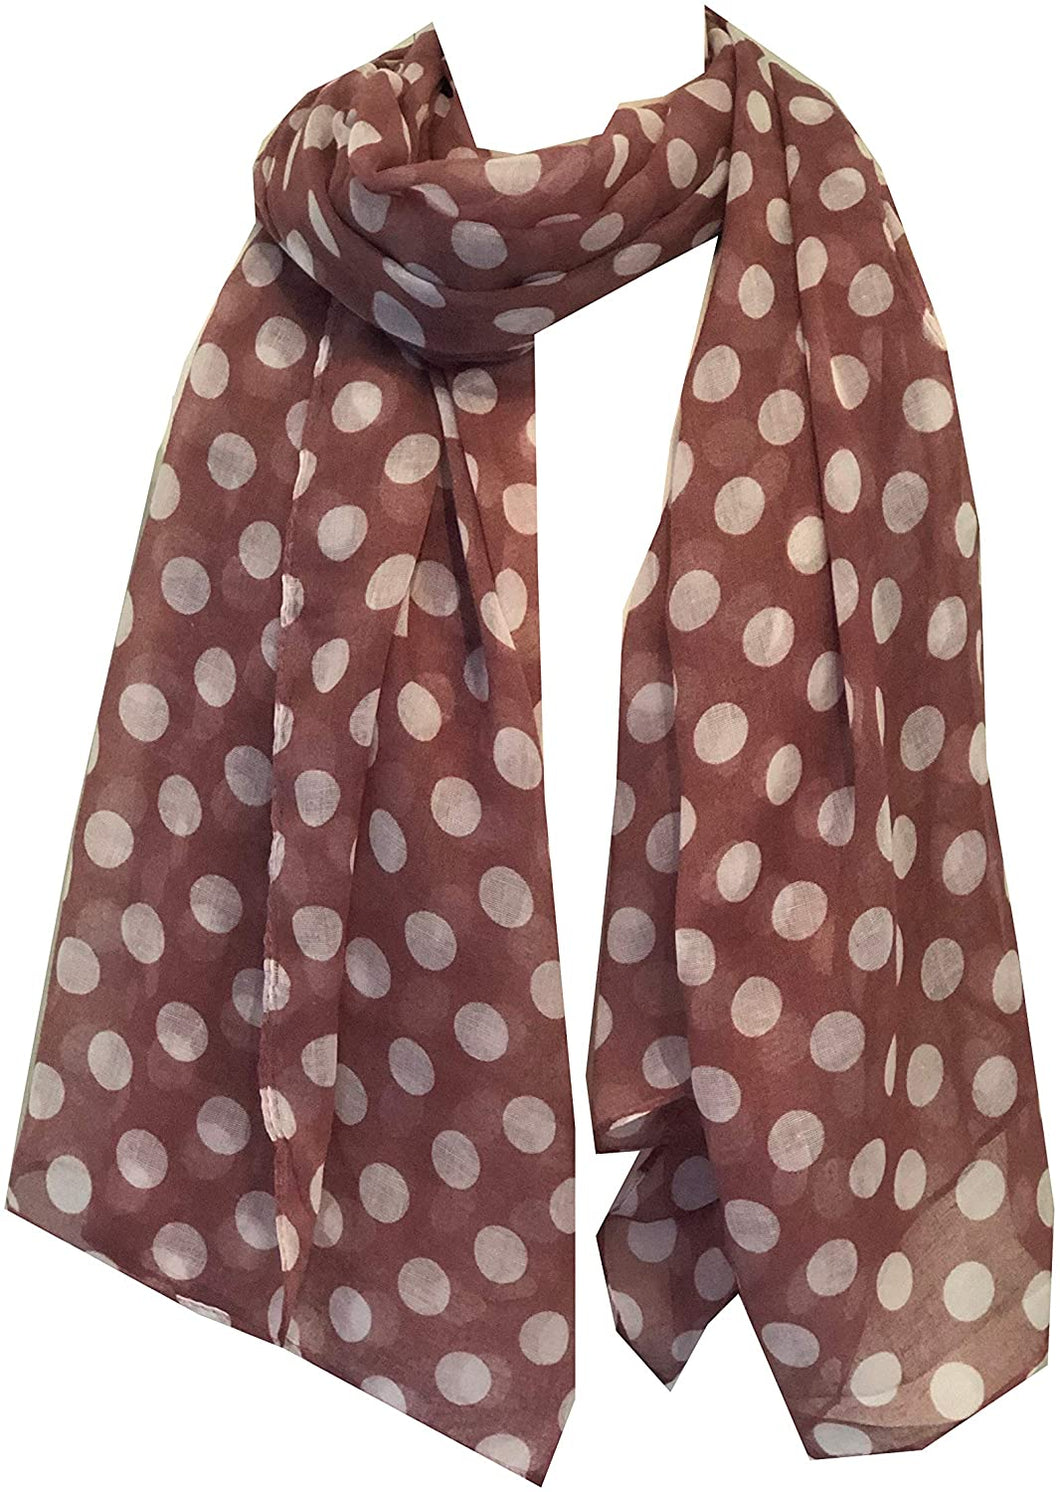 Pamper Yourself Now Pink with White Big spot Scarf/wrap